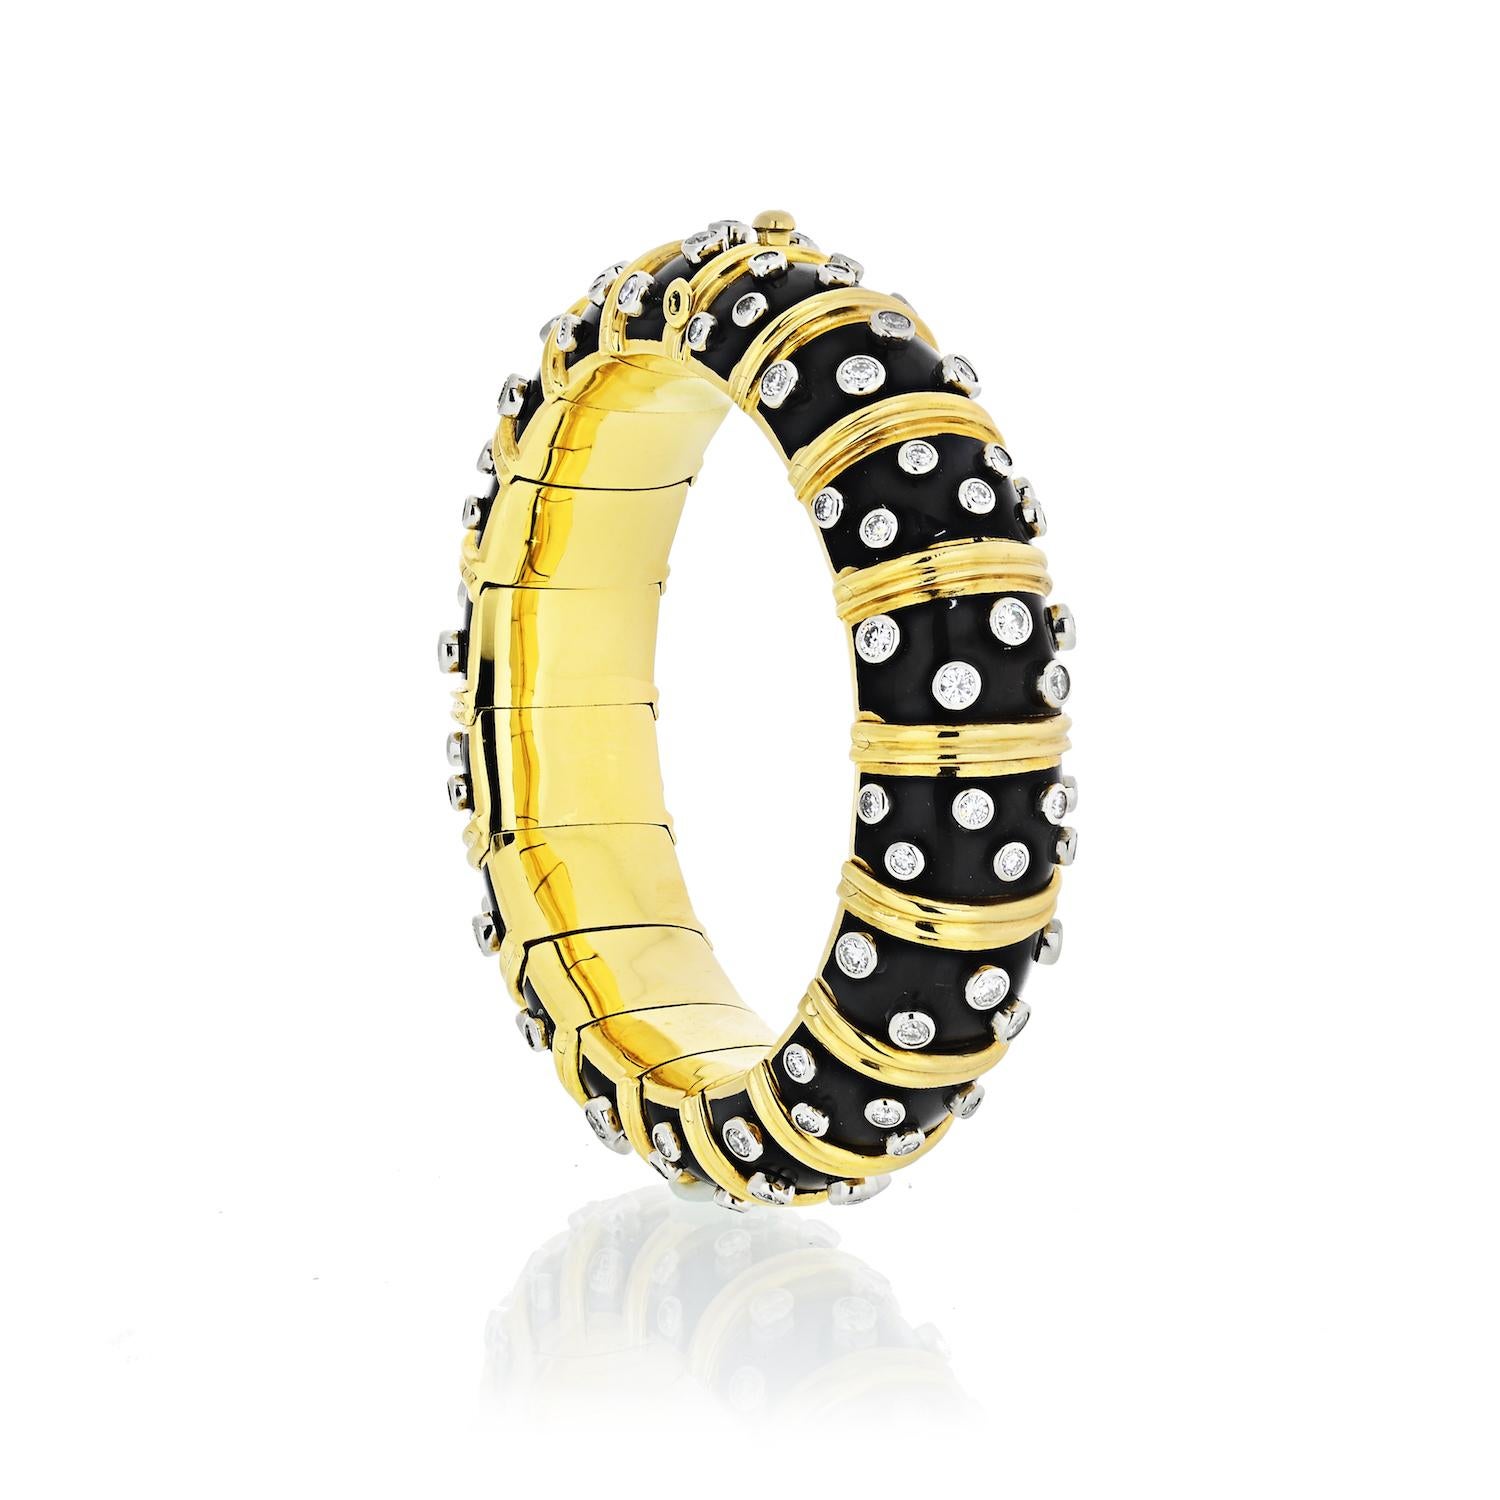 AN ENAMEL AND DIAMOND BANGLE BRACELET, BY JEAN SCHLUMBERGER, TIFFANY & CO.
18 kt., the articulated link bombe bangle applied with black paillonne enamel, alternately spaced by ribbed gold bands, studded with 108 collet-set round diamonds